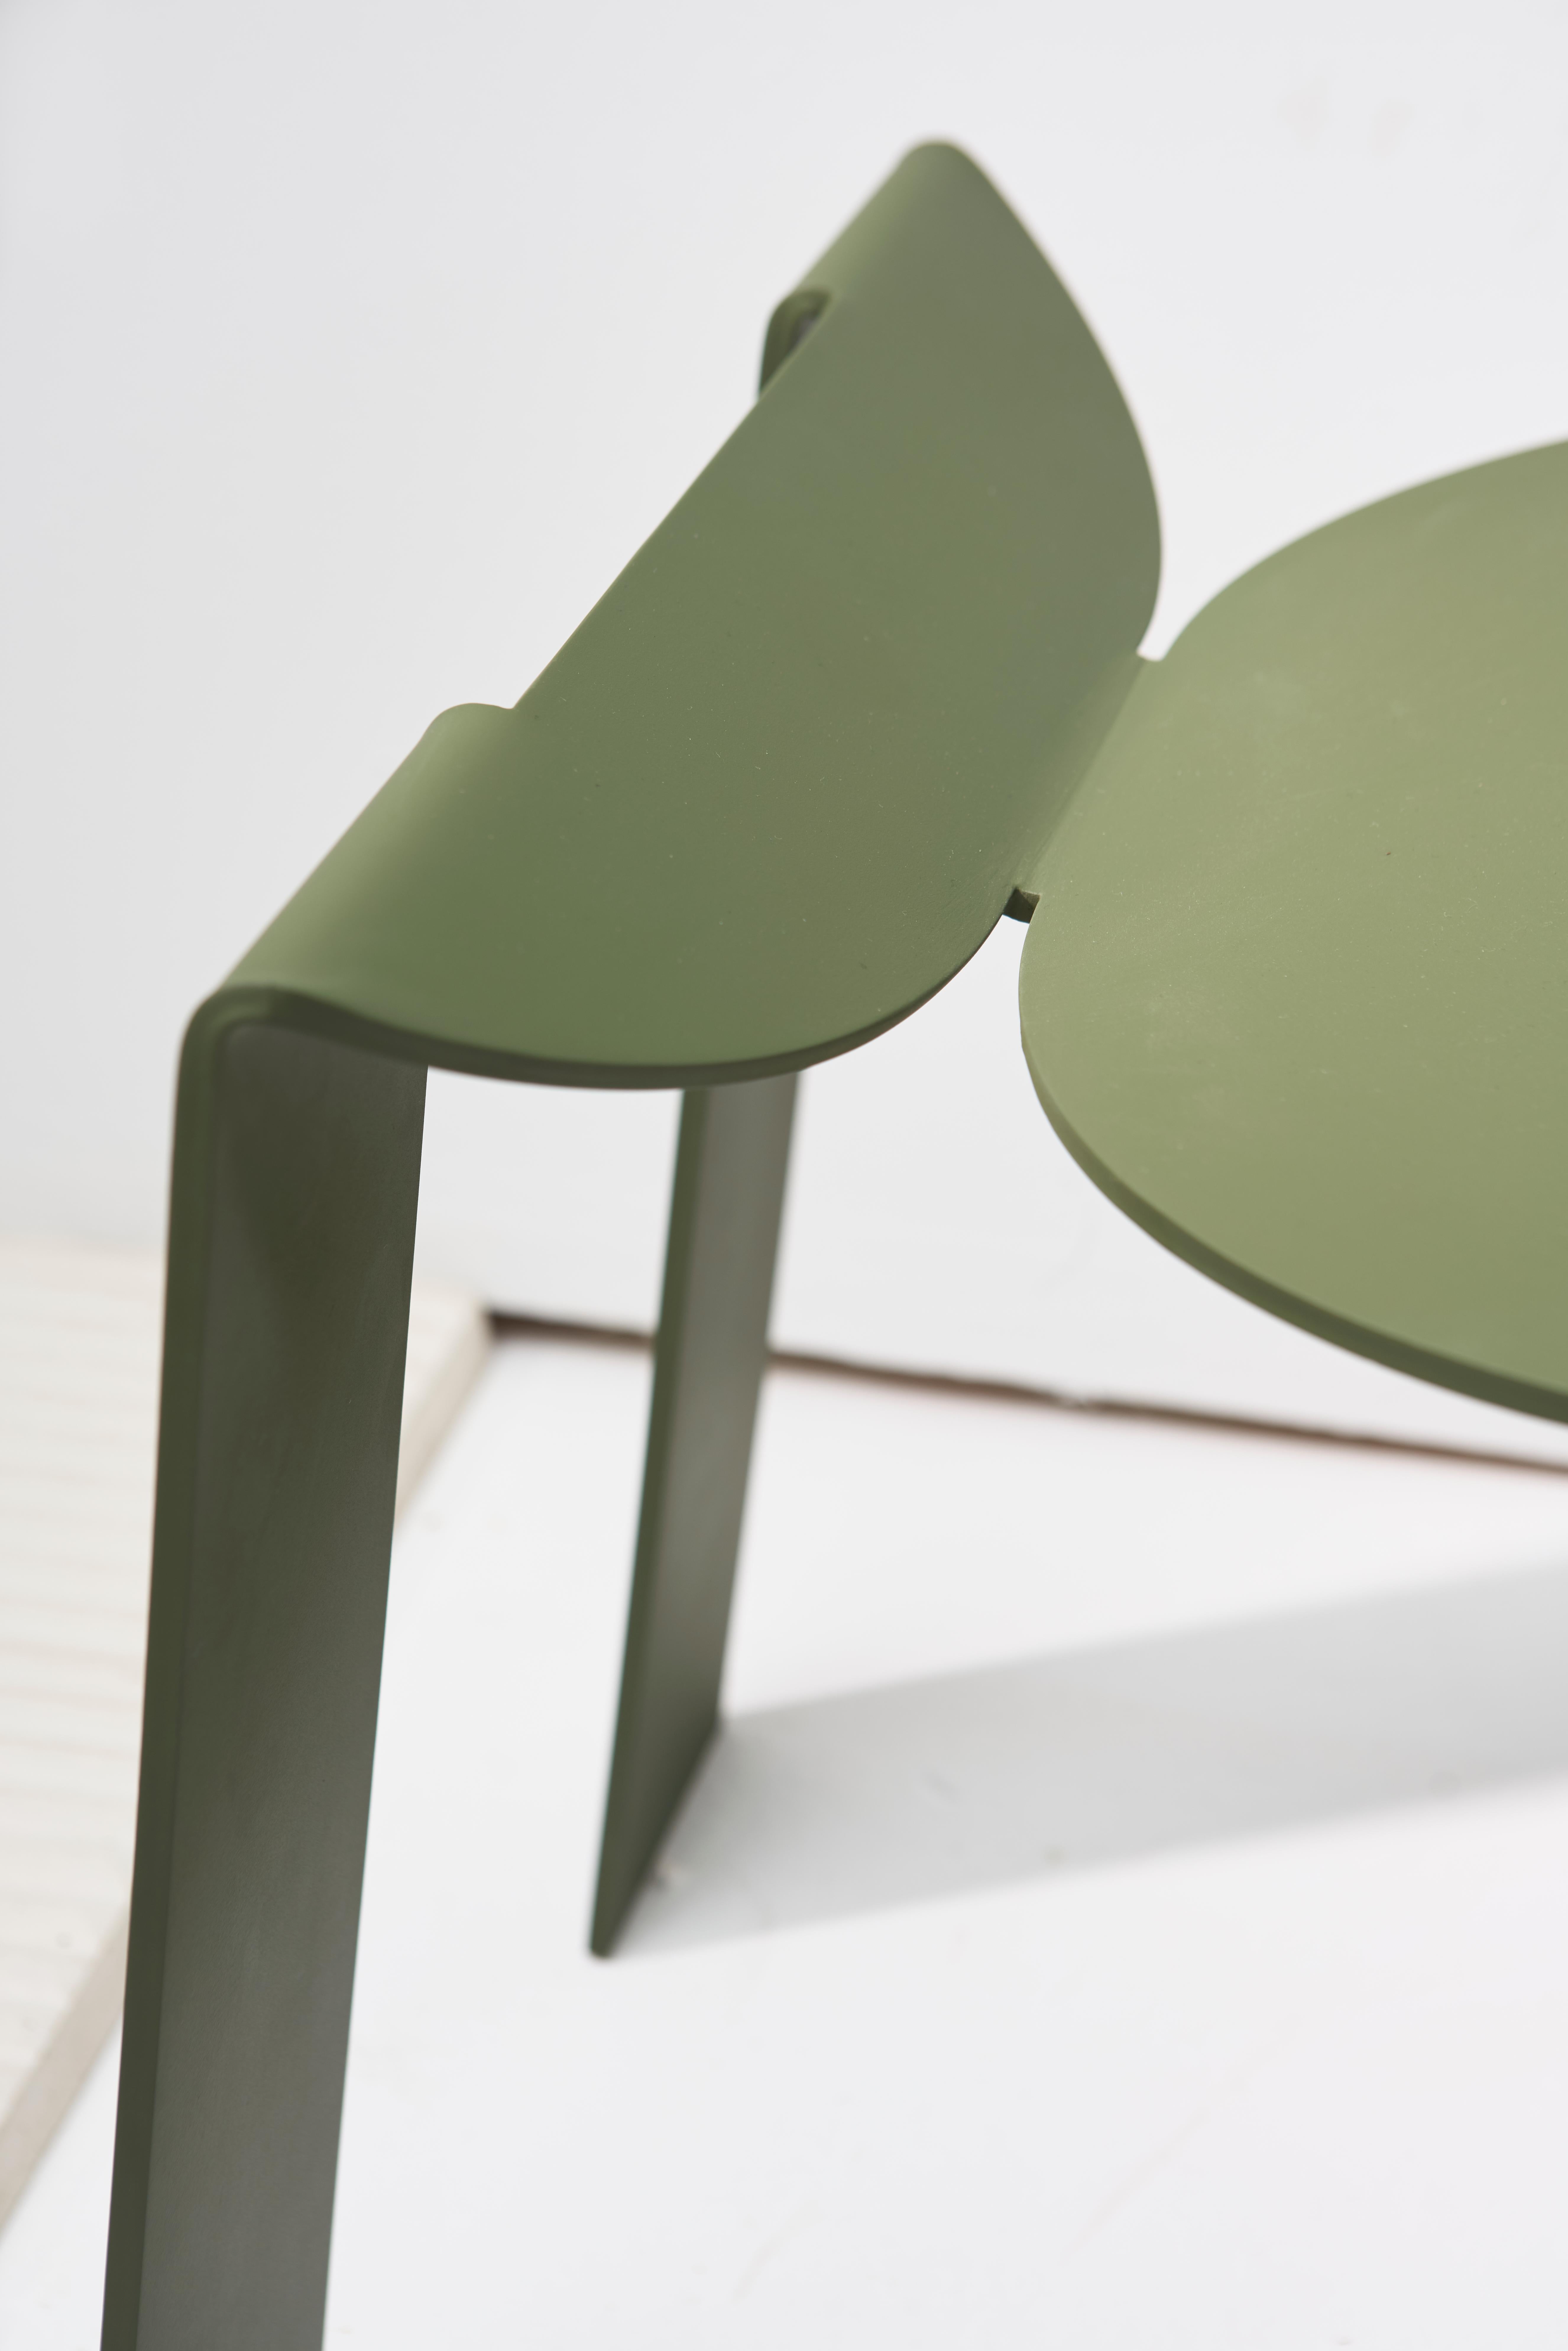 Tropos Collection, Brazilian Contemporary Stool in Steel In New Condition For Sale In Belo Horizonte, Minas Gerais